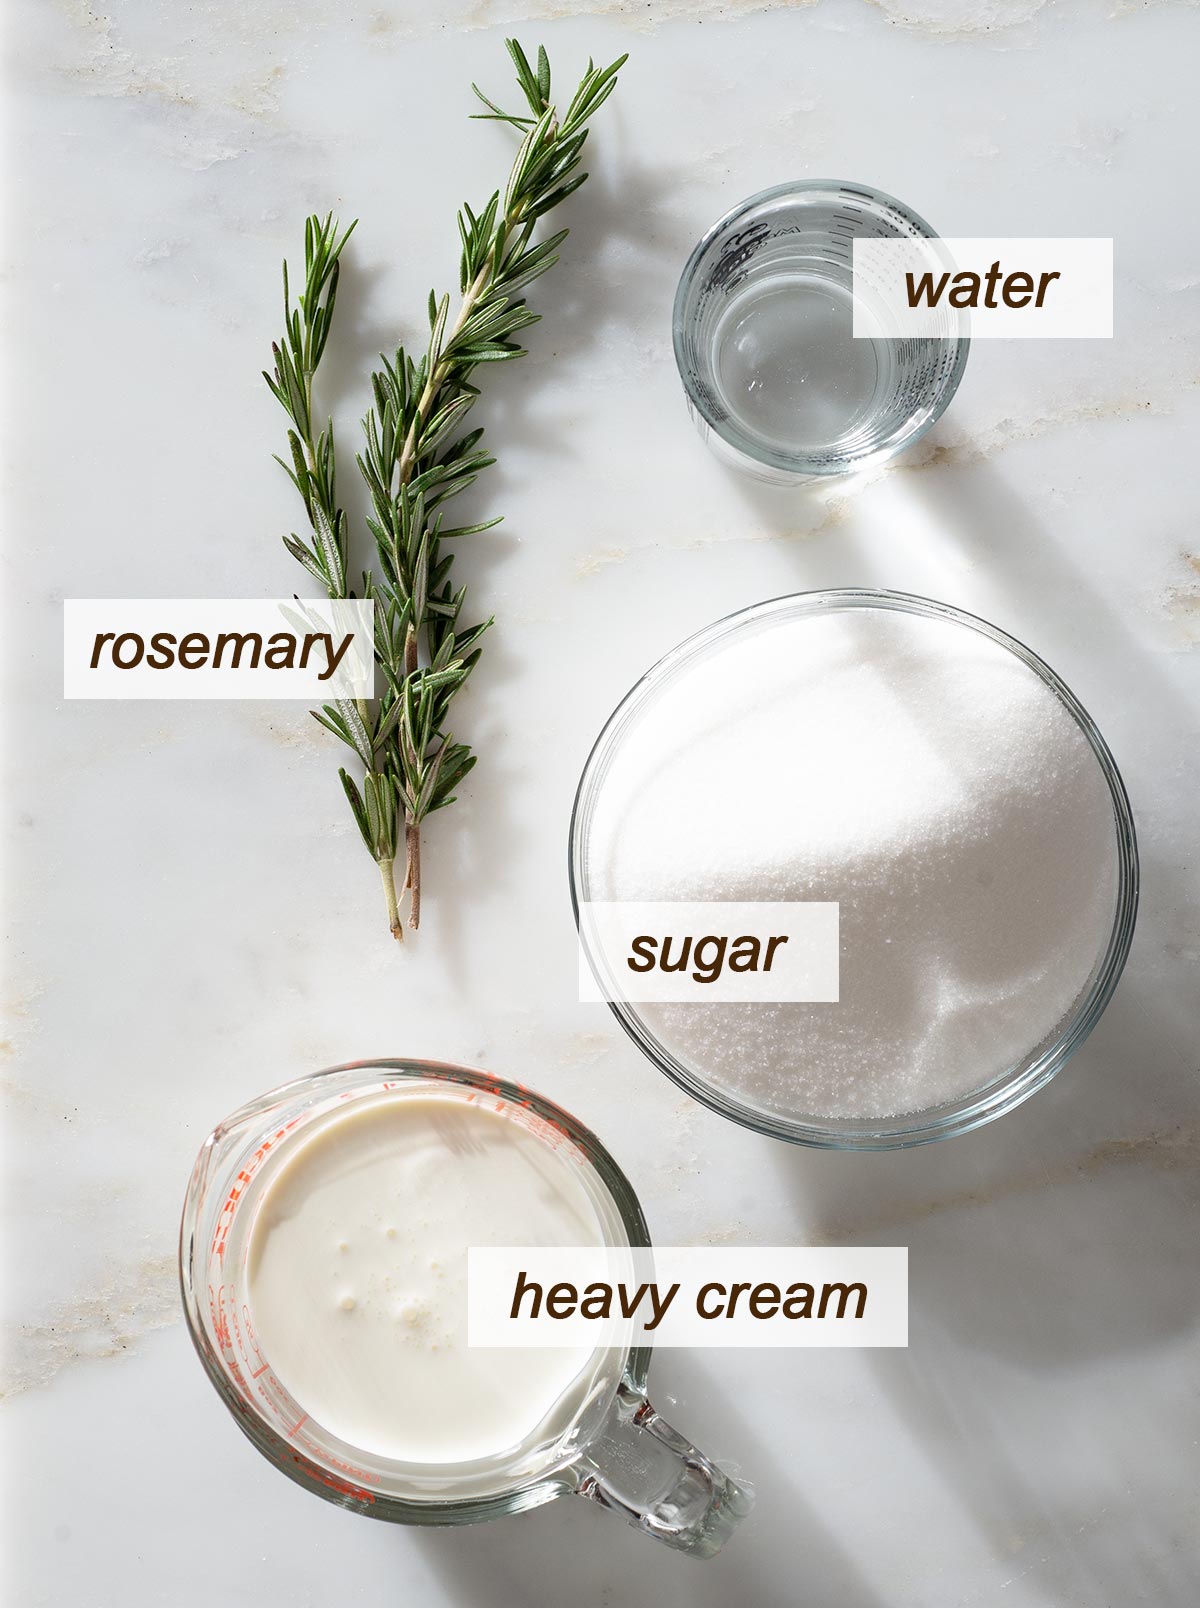 Rosemary caramel ingredients on a table.